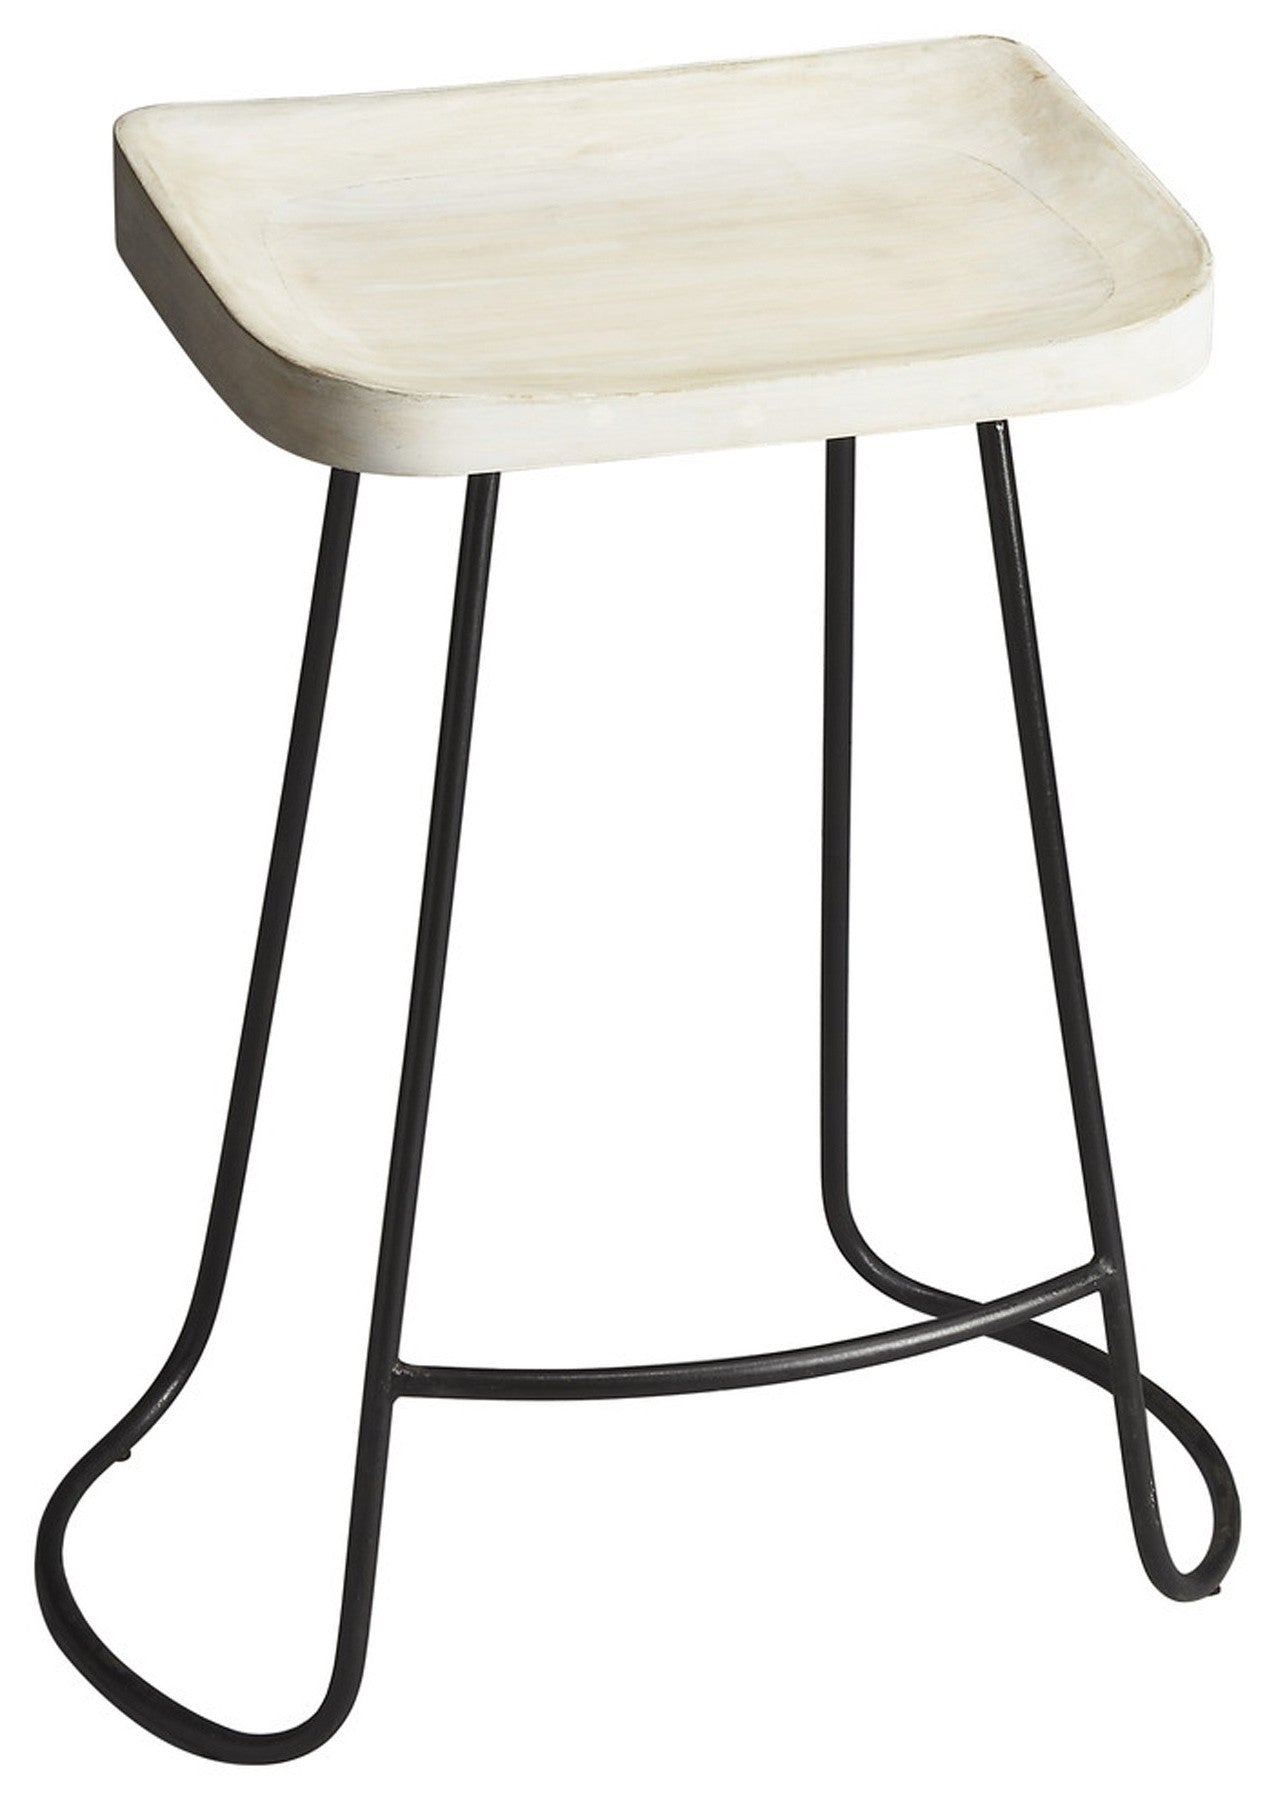 " Off White And Black Iron Backless Counter Height Bar Chair